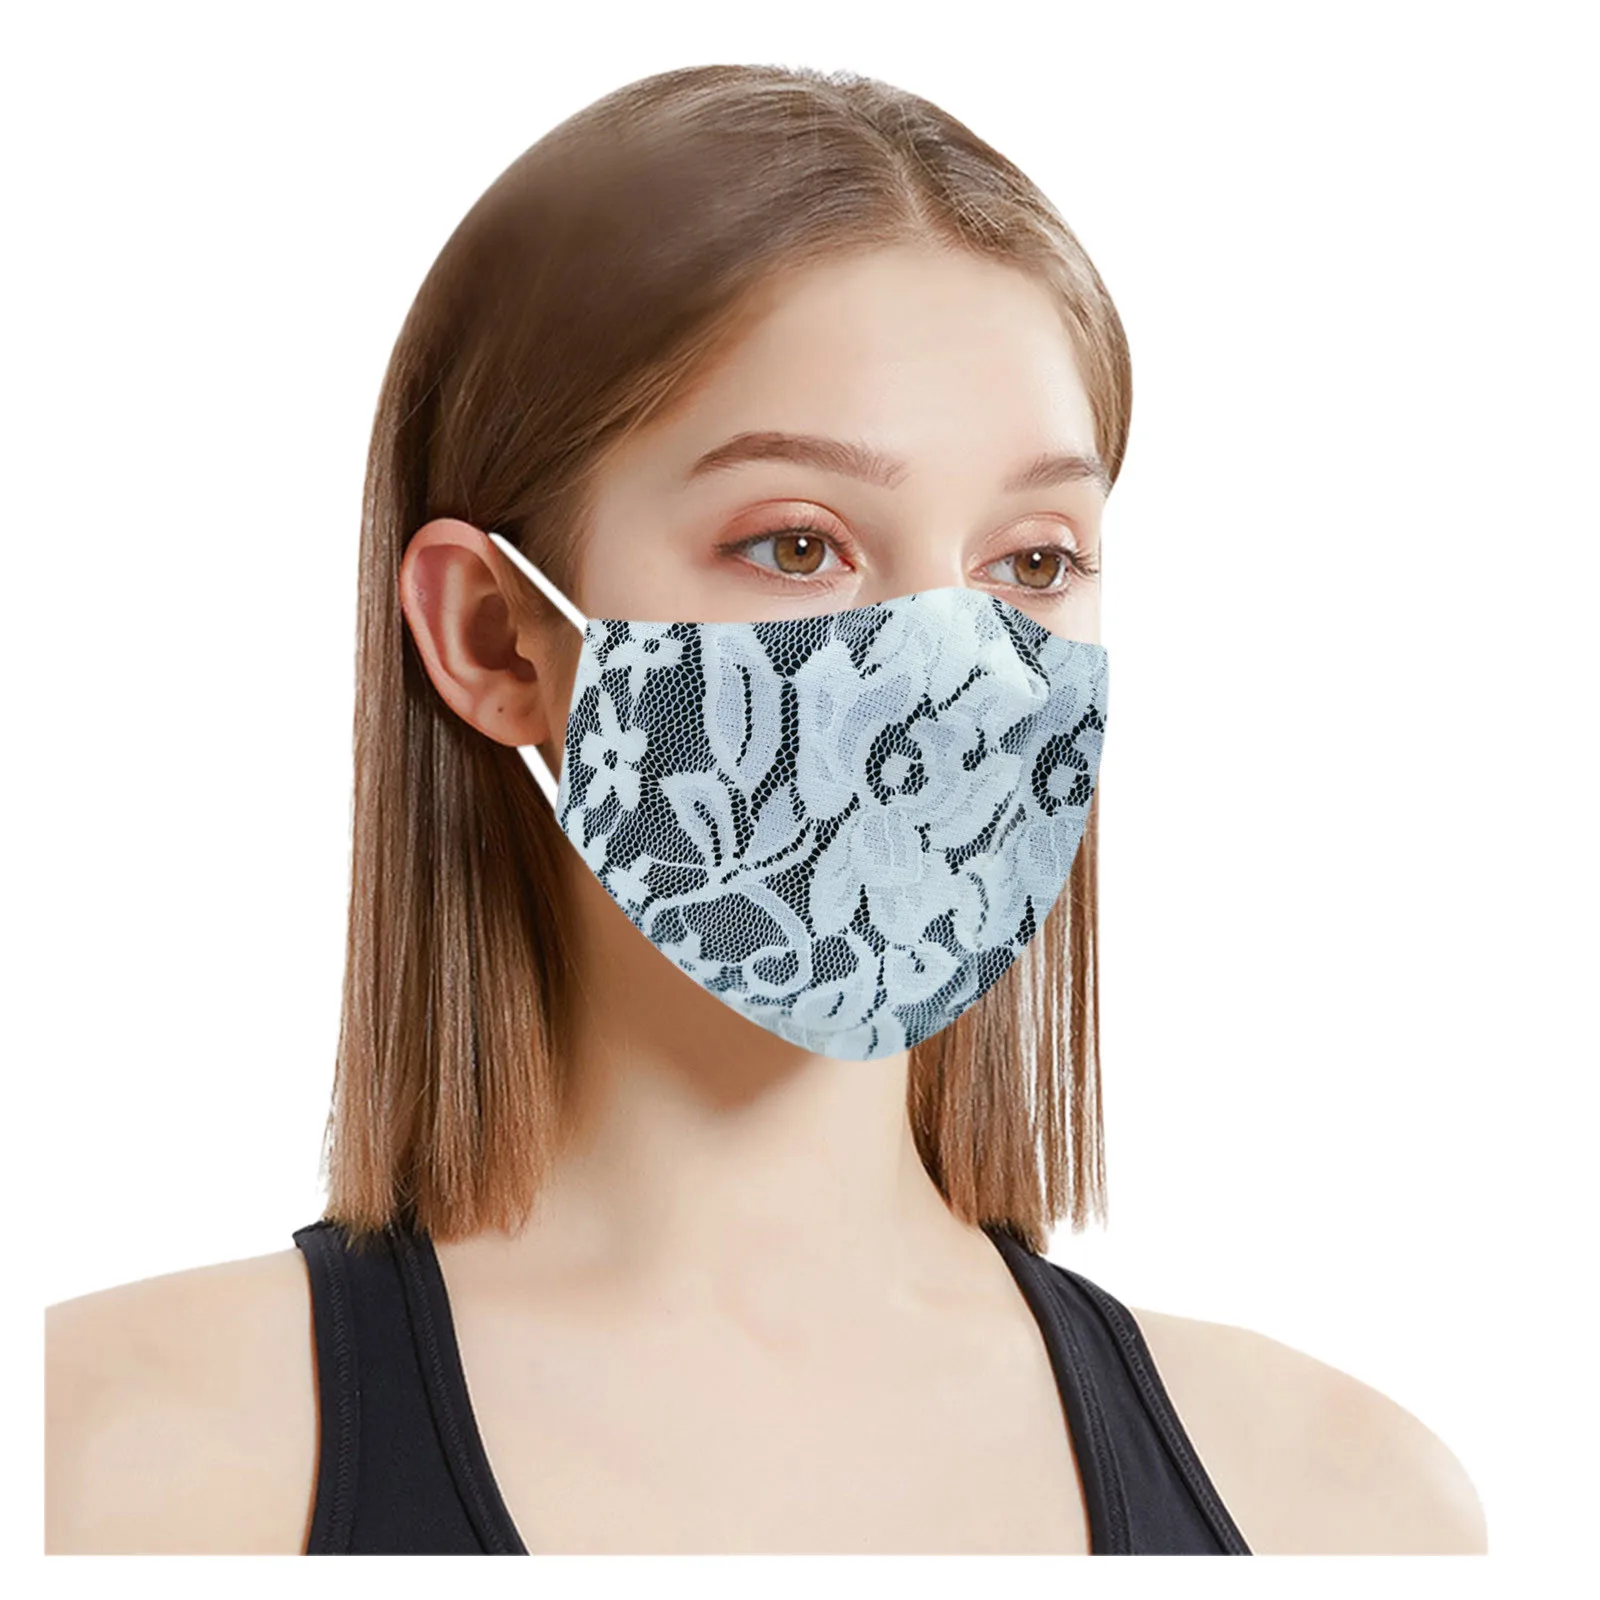 1PC Printed Halloween Gift Funny Scary Outdoor Washable Reusable Anti Dust Half Face Shield for Students Teens with Adjustable Ear Loops